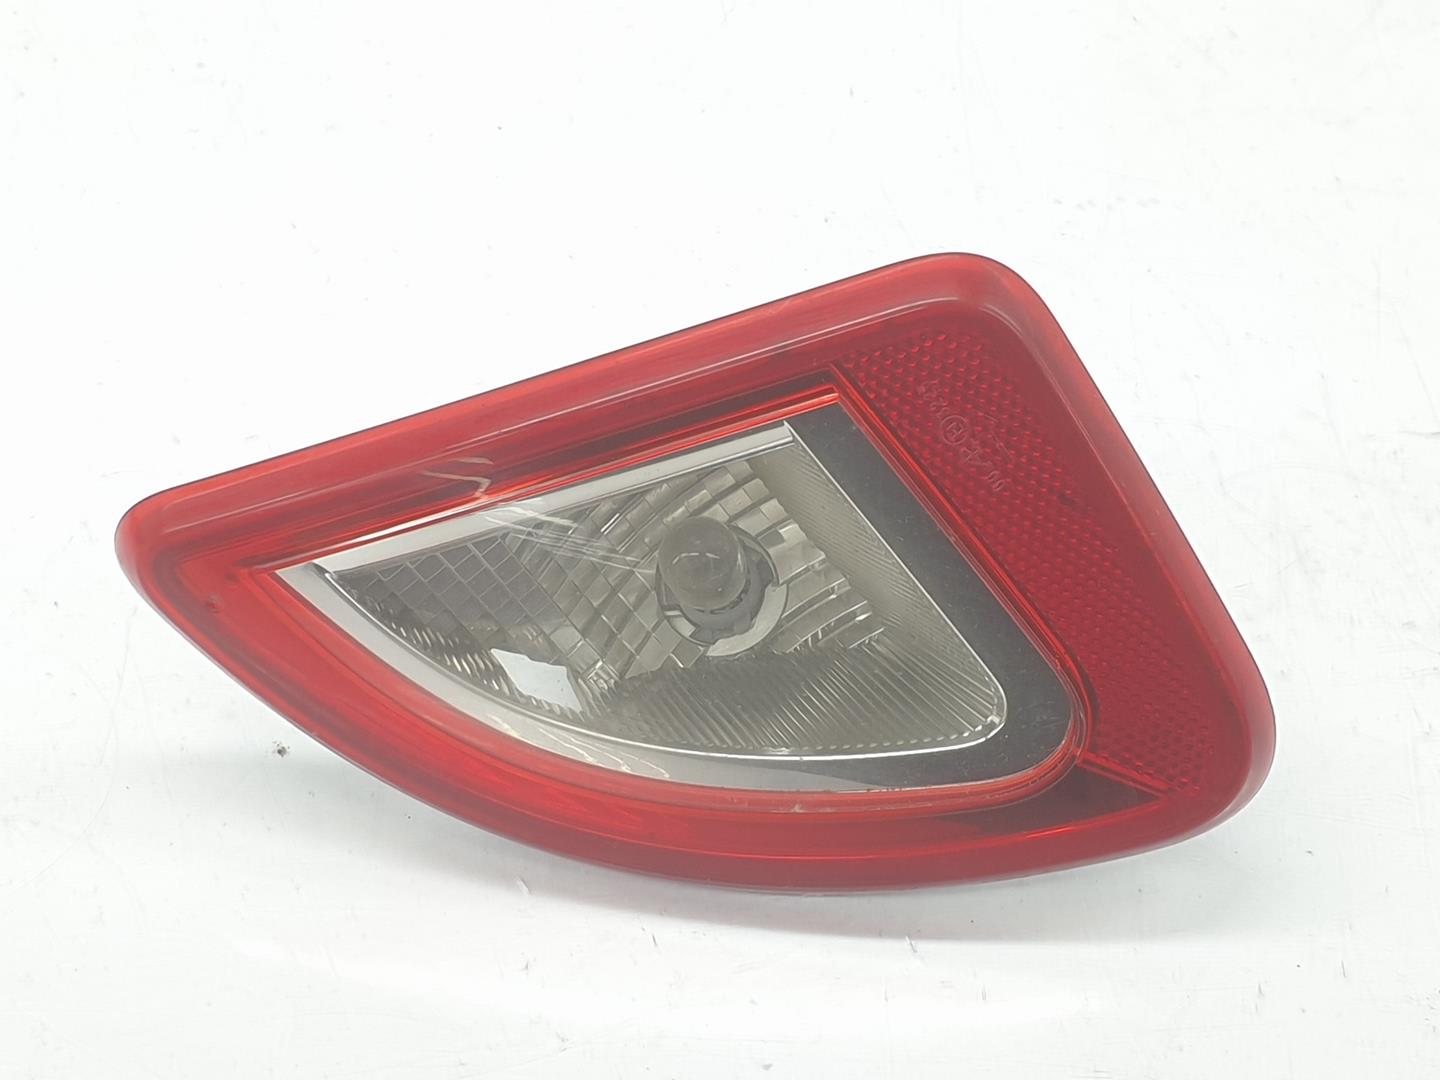 RENAULT Twingo 2 generation (2007-2014) Rear Right Taillight Lamp 265503882R, 265503882R 24133908